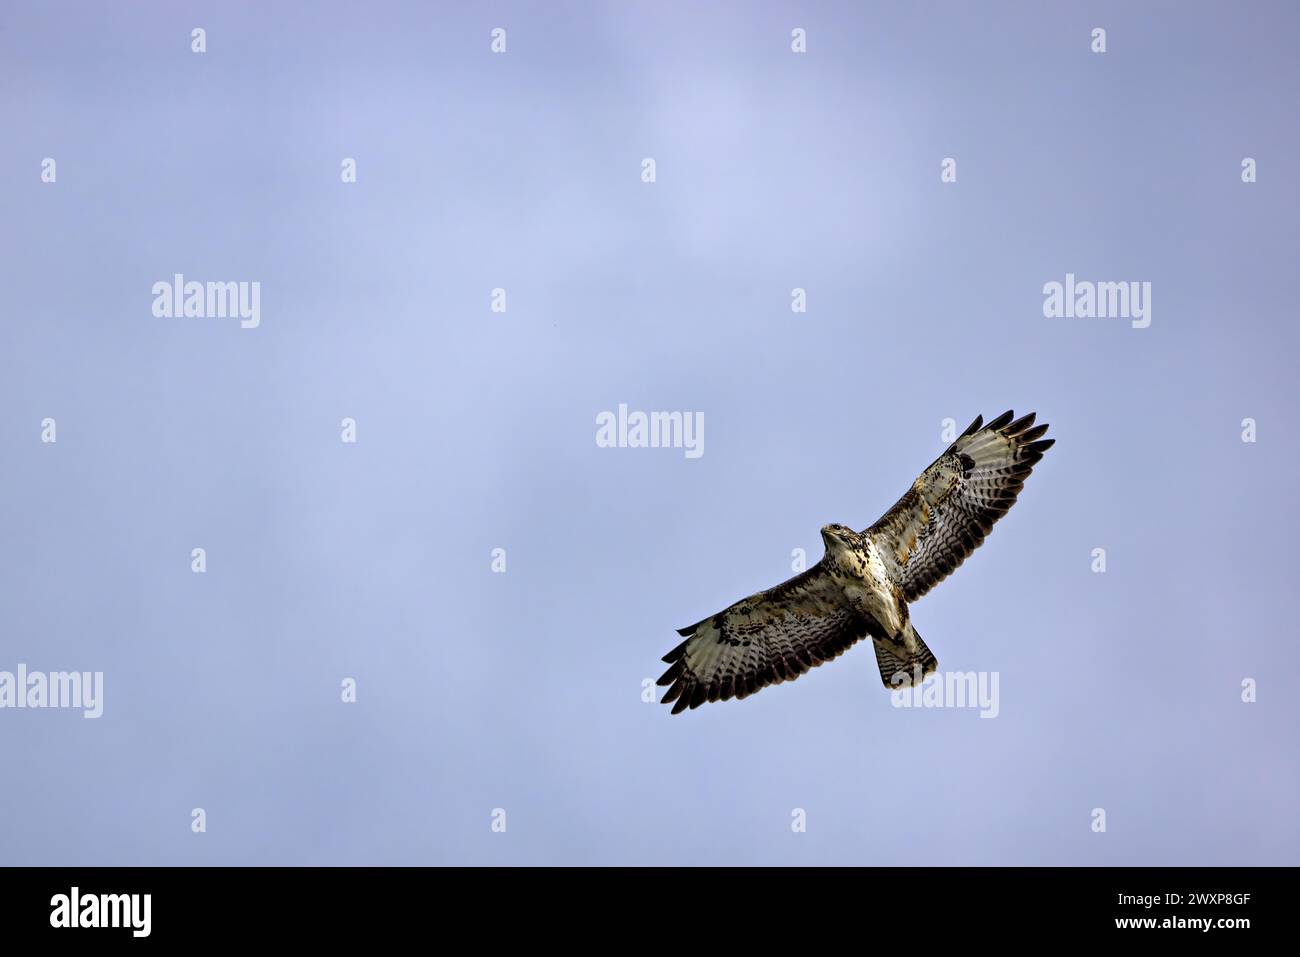 An adult hawk soaring in the clear blue sky Stock Photo